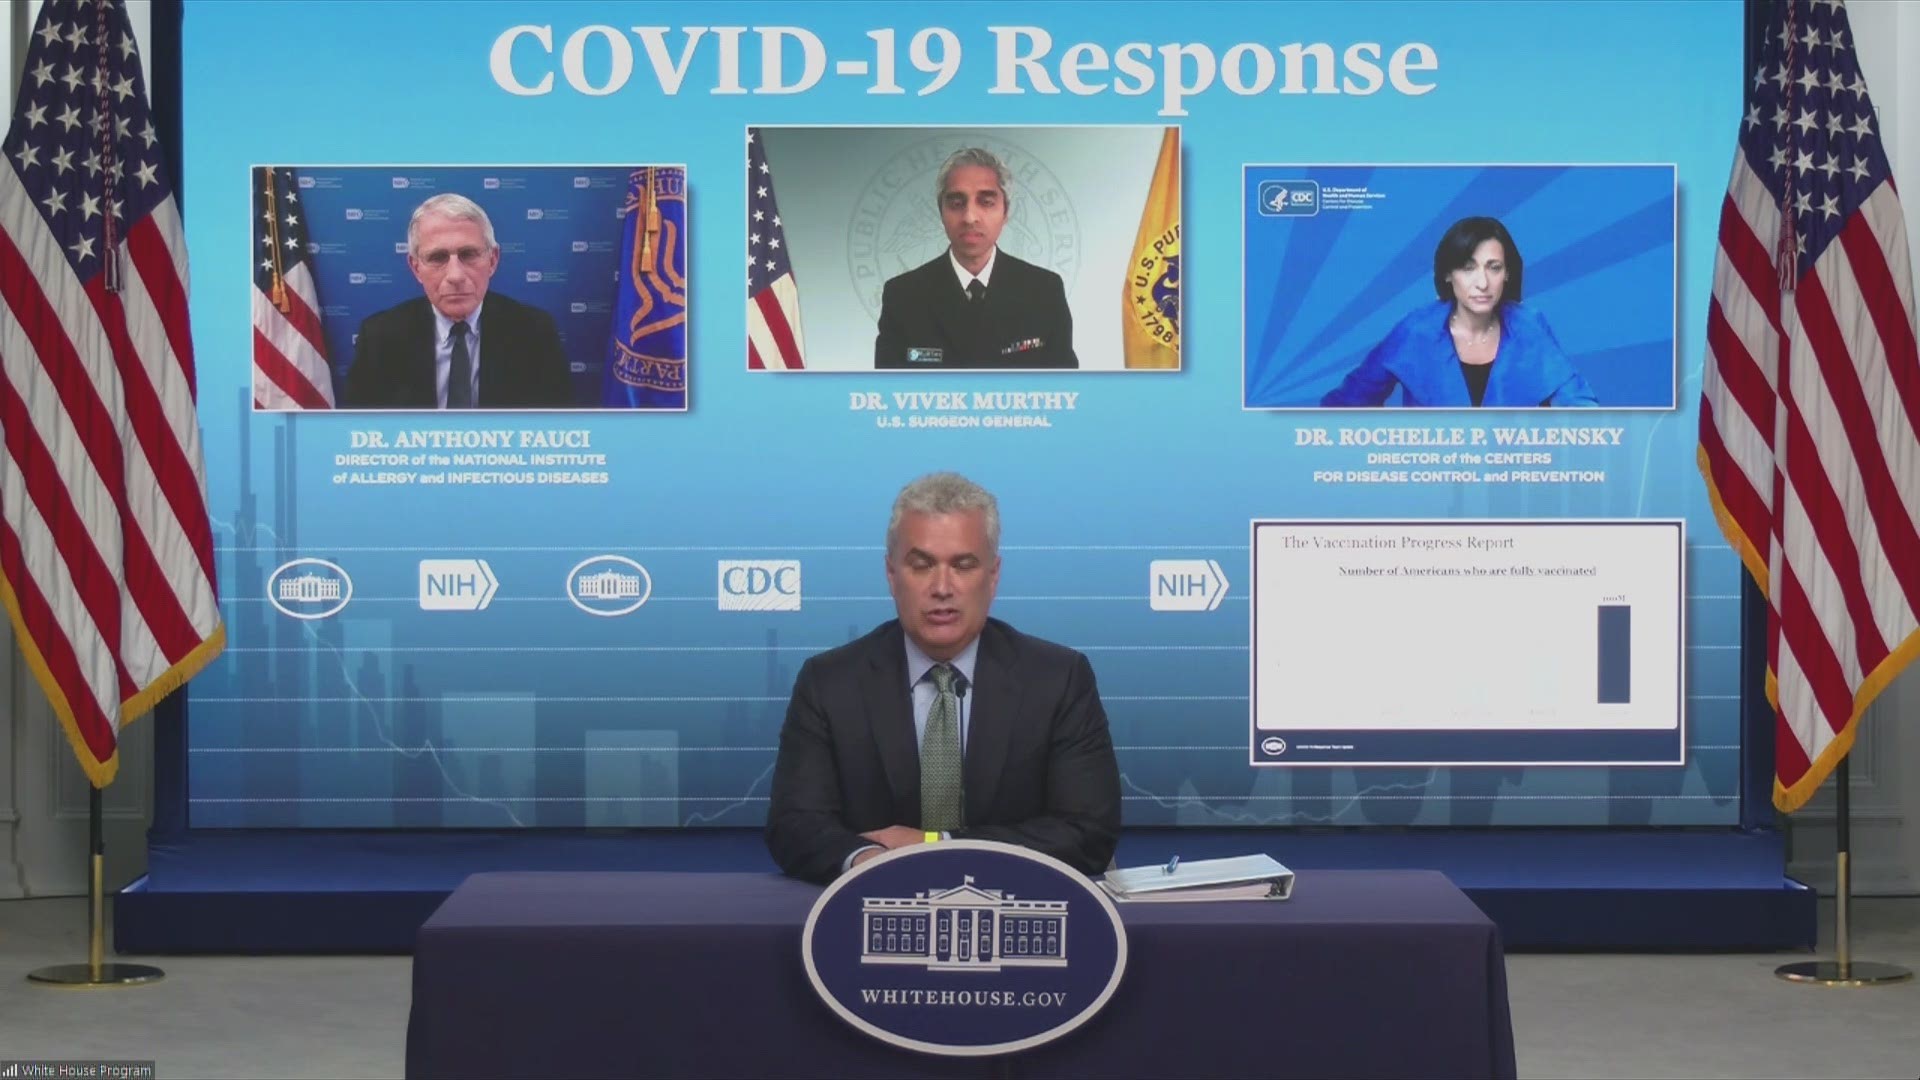 During Friday's White House COVID-19 briefing, officials announced 100 million Americans are now fully vaccinated against COVID-19.